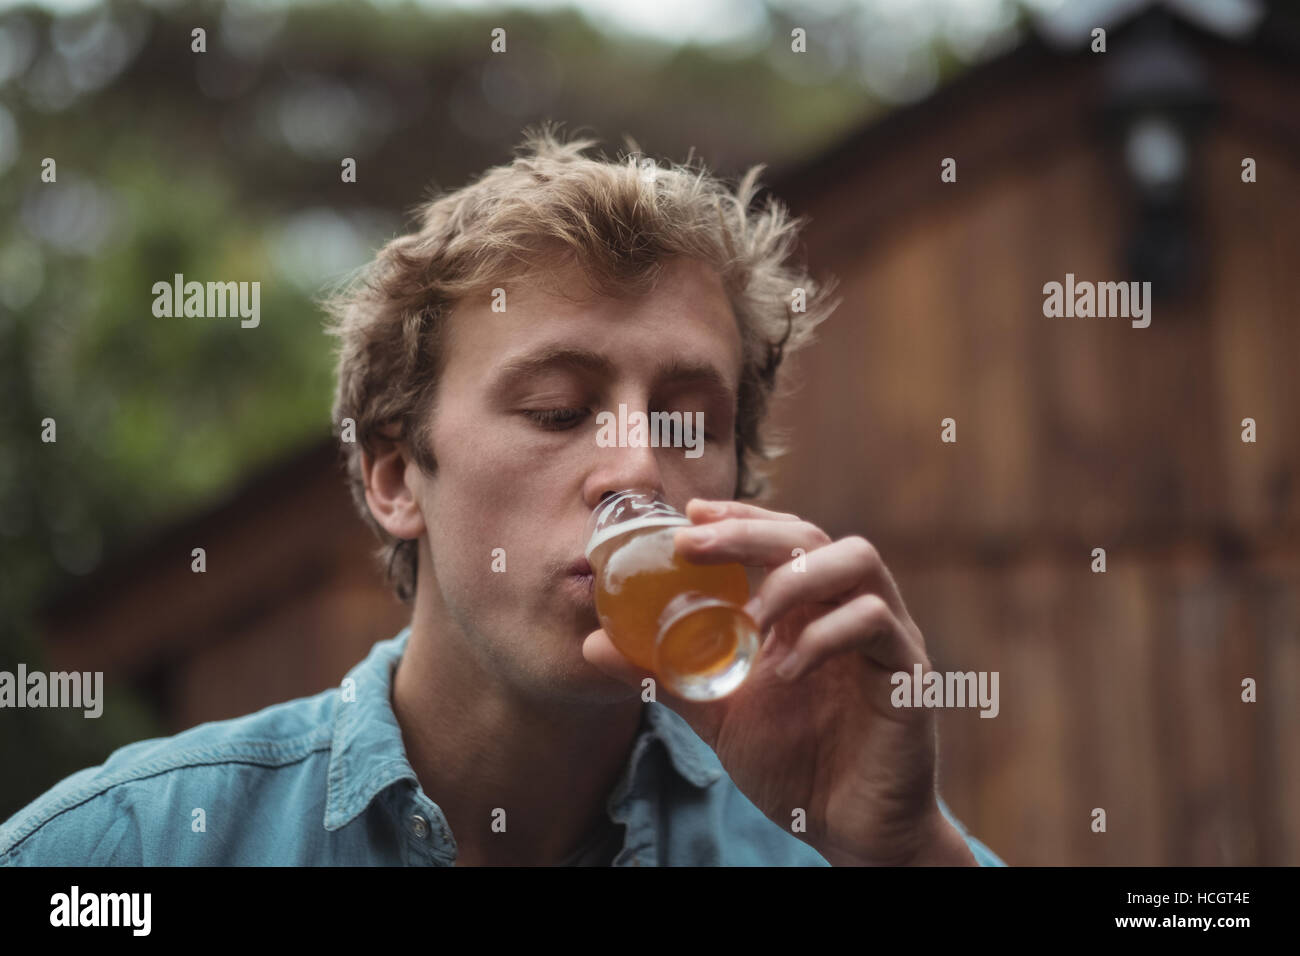 Man drinking beer from beer glass Stock Photo